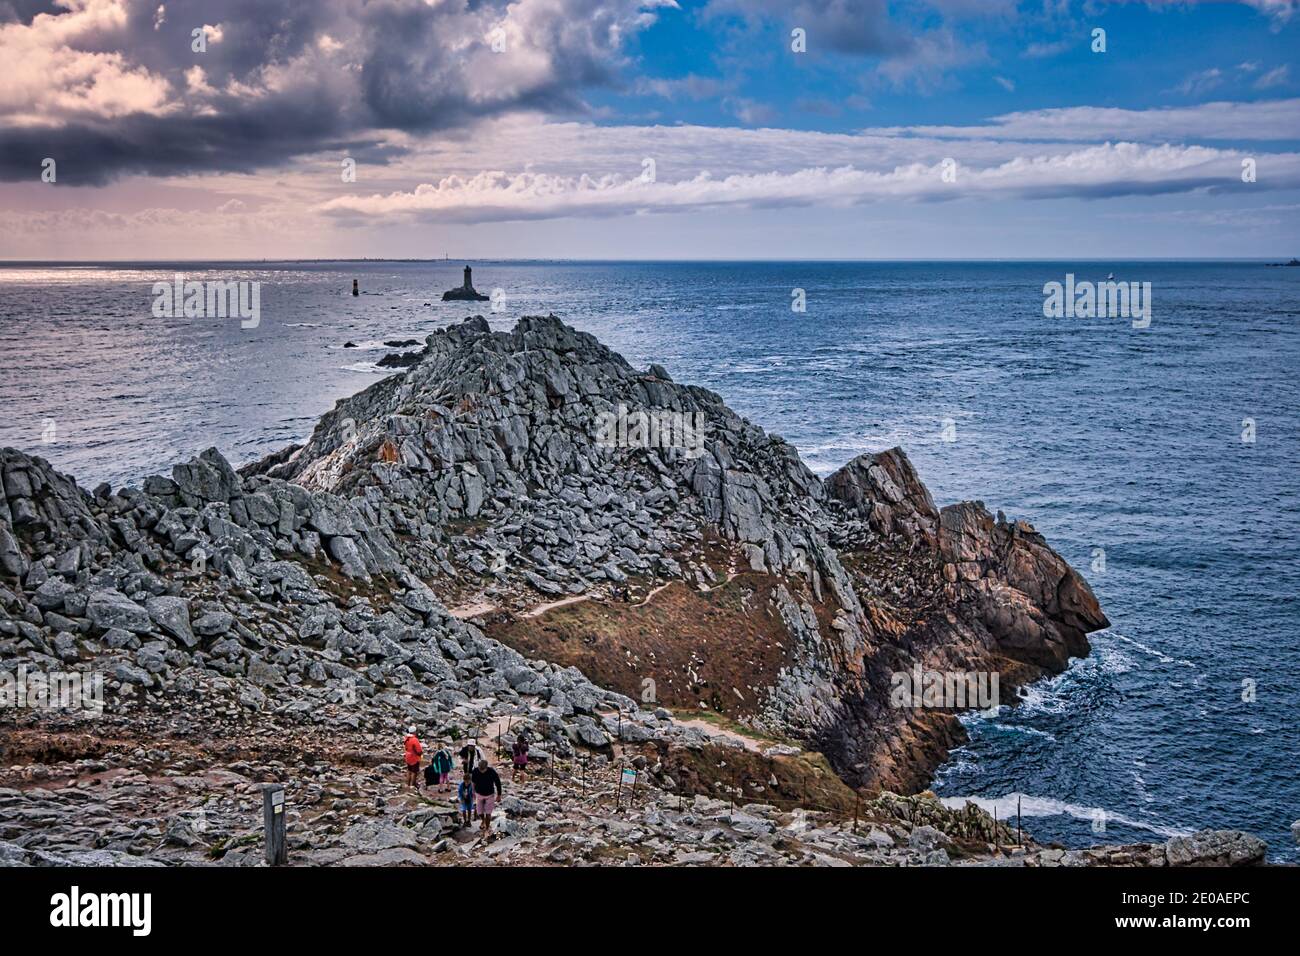 Pointe du Raz is the westernmost tip of France. It is a promontory overlooking the Iroise Sea on the Atlantic coast of Brittany. Stock Photo